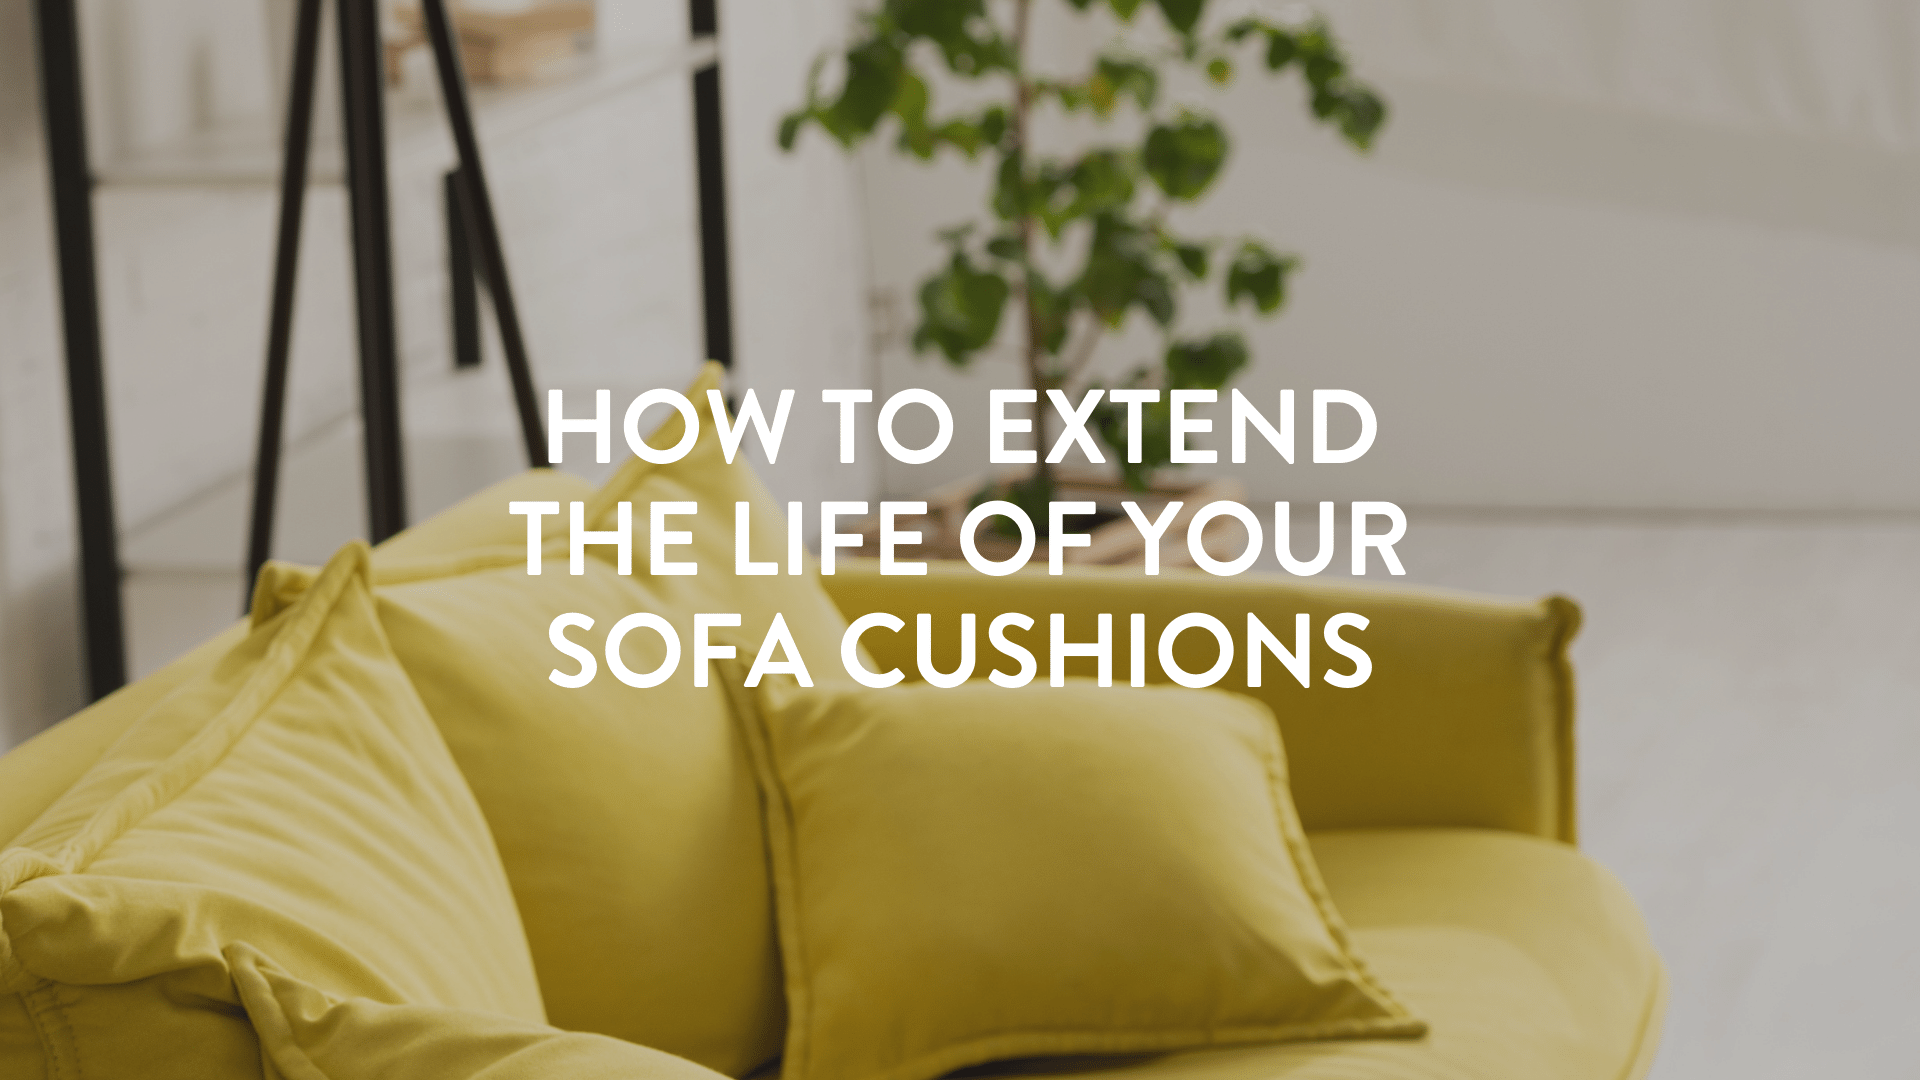 http://putnams.co.uk/cdn/shop/articles/HOW_TO_EXTEND_THE_LIFE_OF_YOUR_SOFA_CUSHIONS.-3.png?v=1643803598